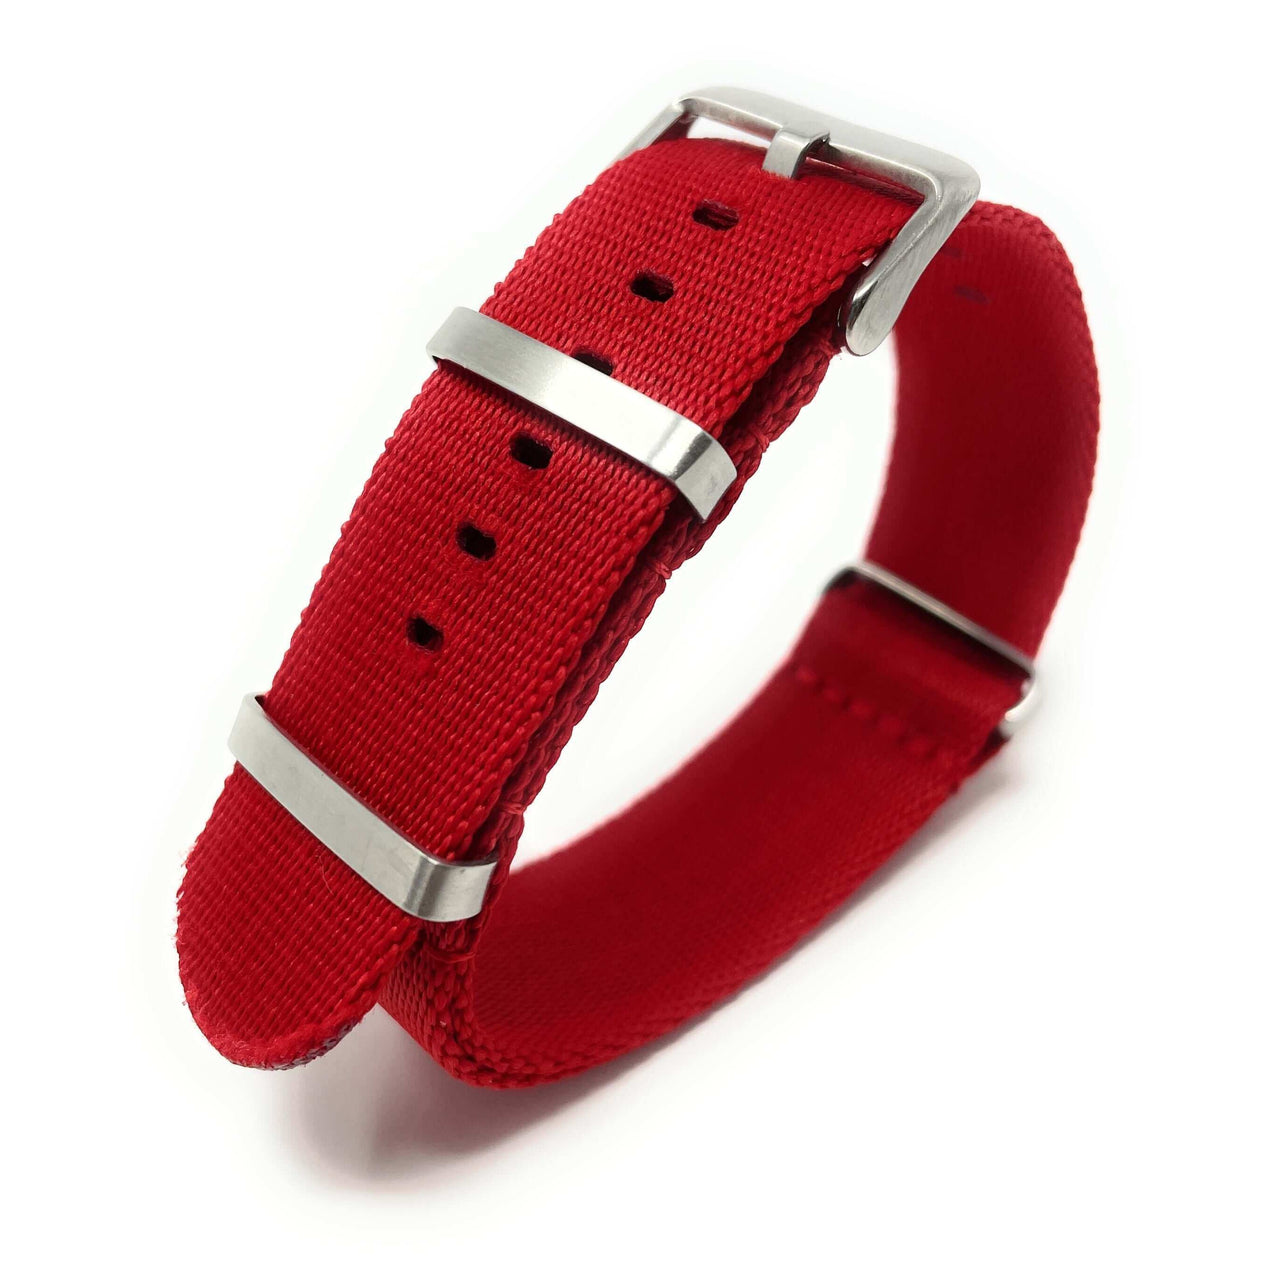 Premium Thick Woven Military Style Watch Strap - Red